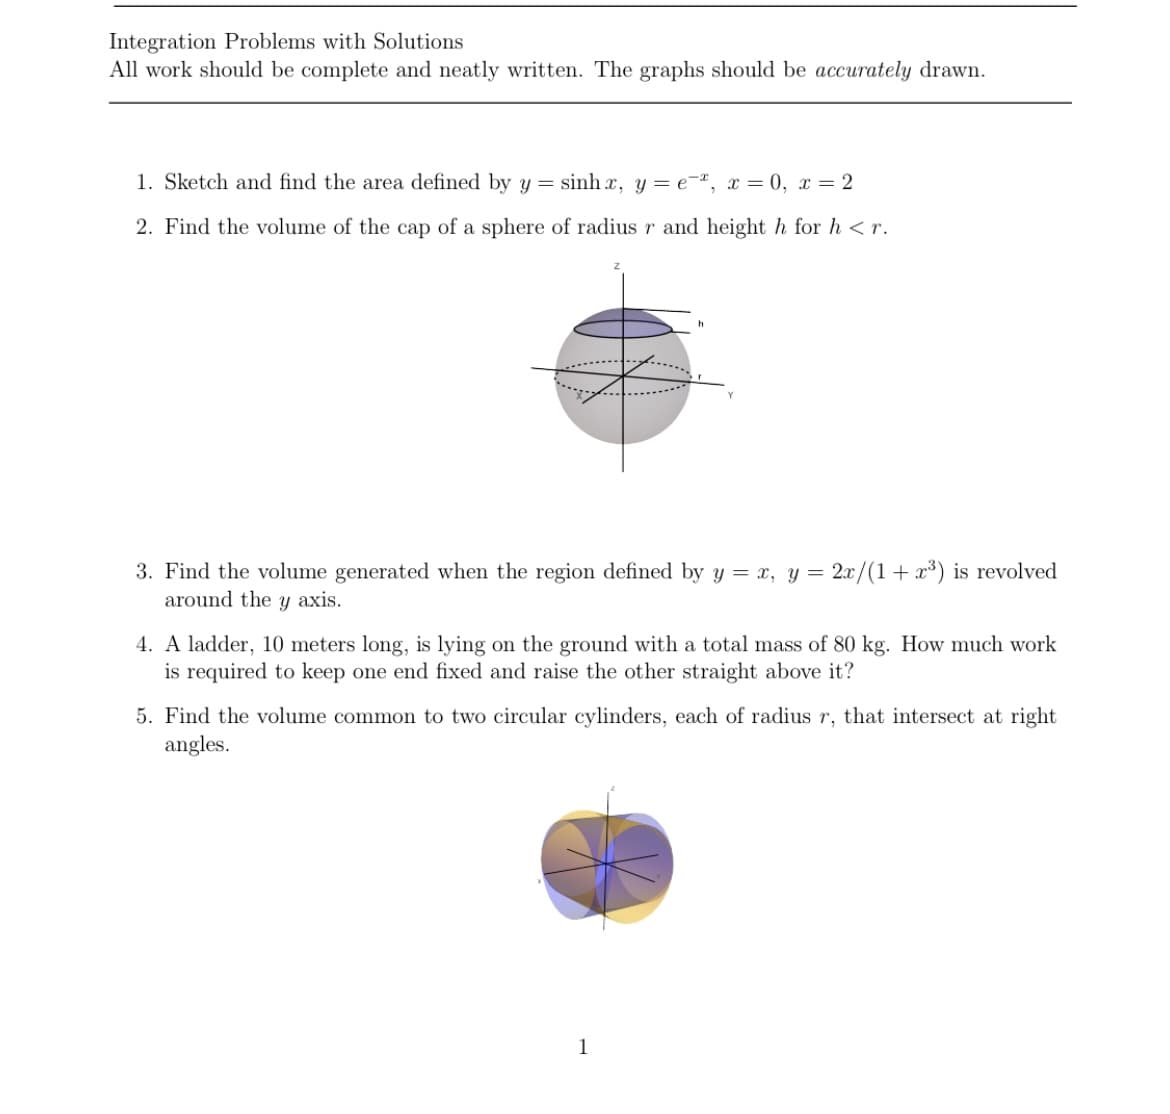 Integration Problems with Solutions
All work should be complete and neatly written. The graphs should be accurately drawn.
1. Sketch and find the area defined by y = sinh x, y = e¯ª, x = 0, x = 2
2. Find the volume of the cap of a sphere of radius r and height h for h <r.
3. Find the volume generated when the region defined by y = x, y = 2x/(1+ x³) is revolved
around the y axis.
4. A ladder, 10 meters long, is lying on the ground with a total mass of 80 kg. How much work
is required to keep one end fixed and raise the other straight above it?
5. Find the volume common to two circular cylinders, each of radius r, that intersect at right
angles.
1
